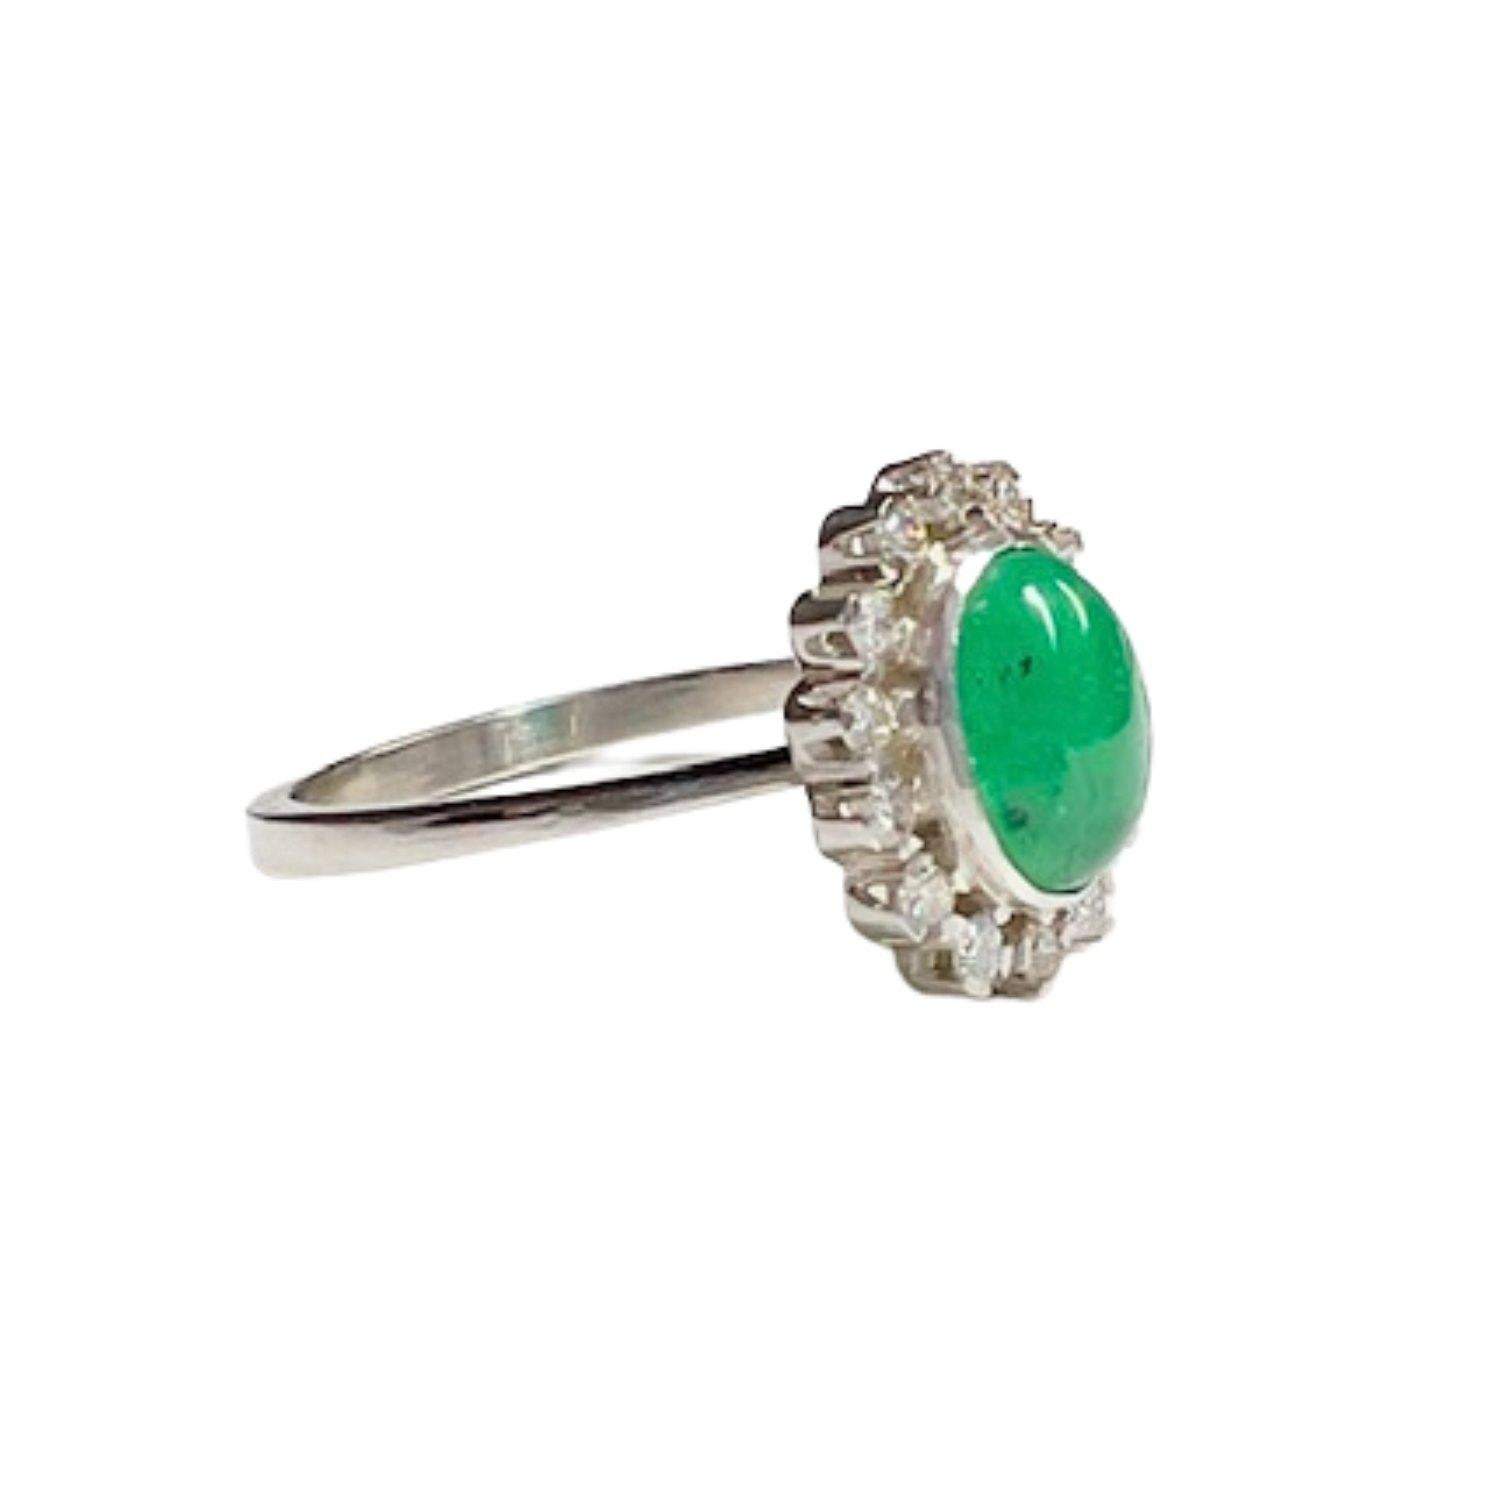 Women's Art Deco Style with Diamonds and Emerald Rosette Platinum Ring